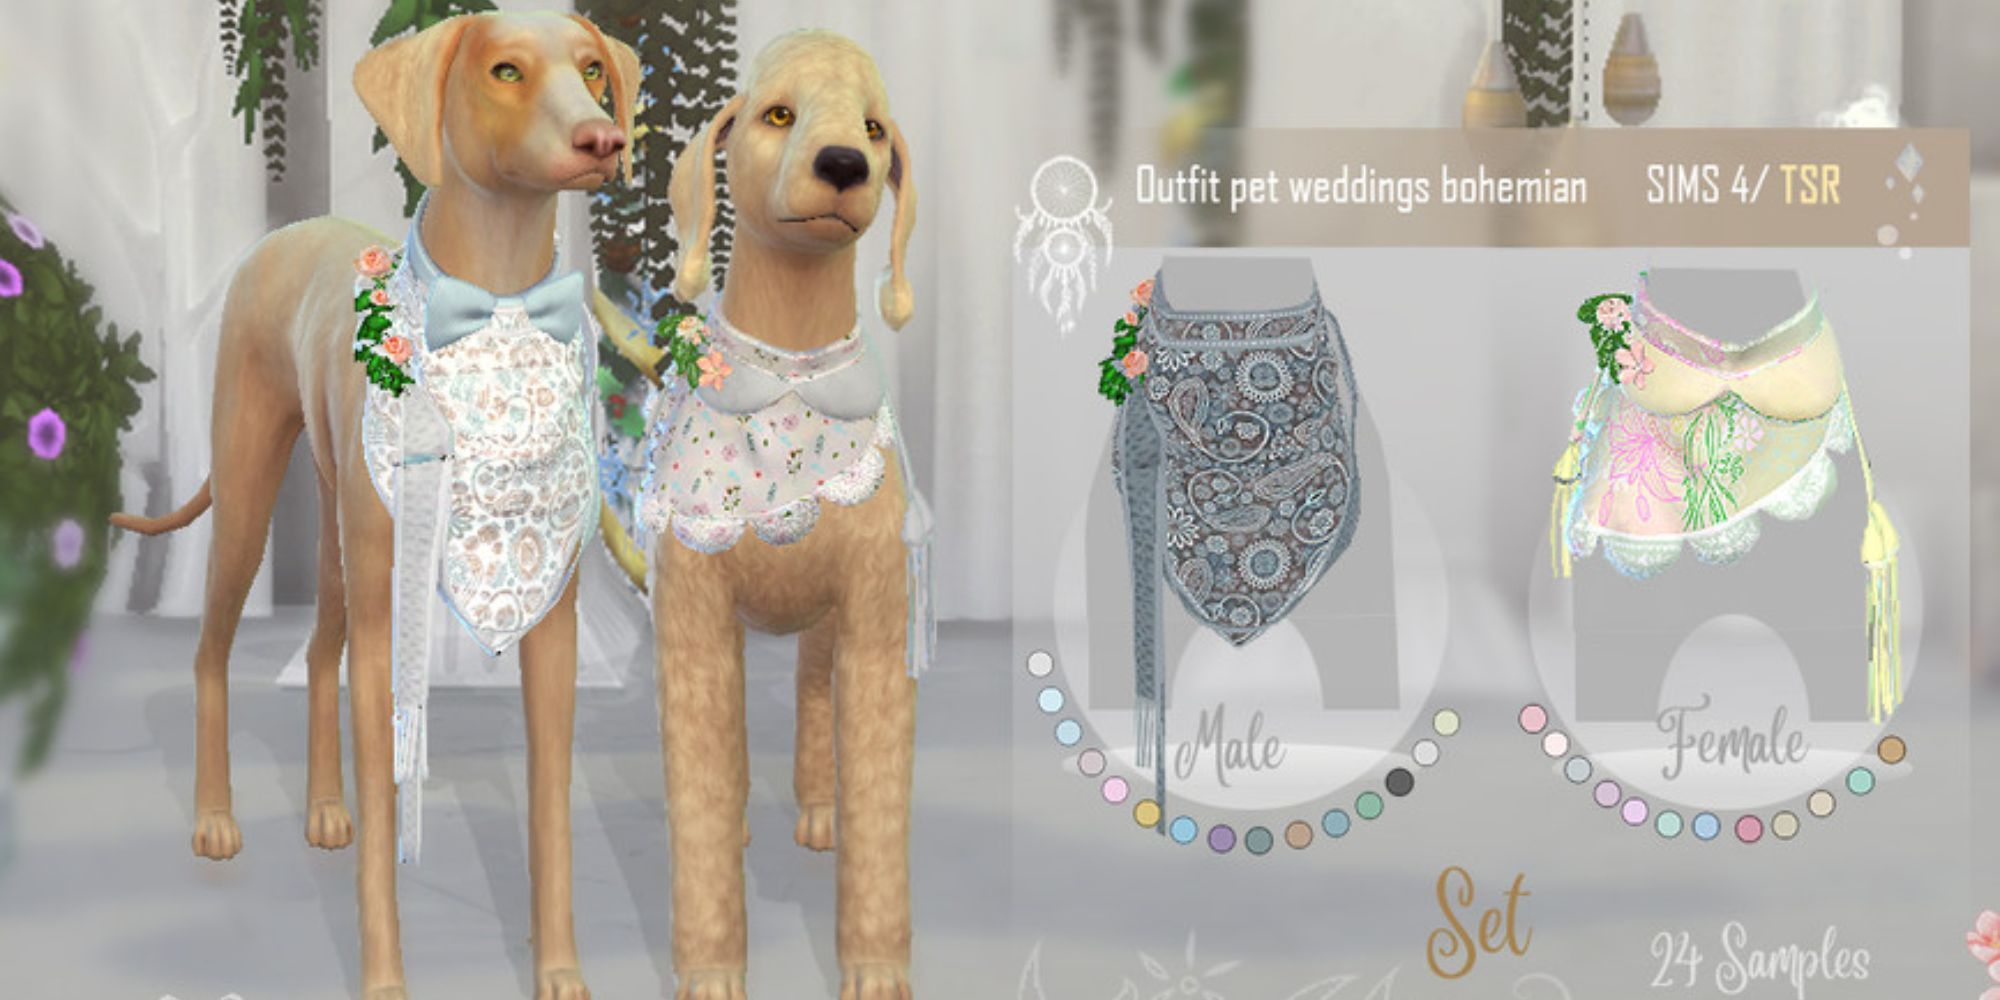 Wedding outfits for dogs in The Sims 4